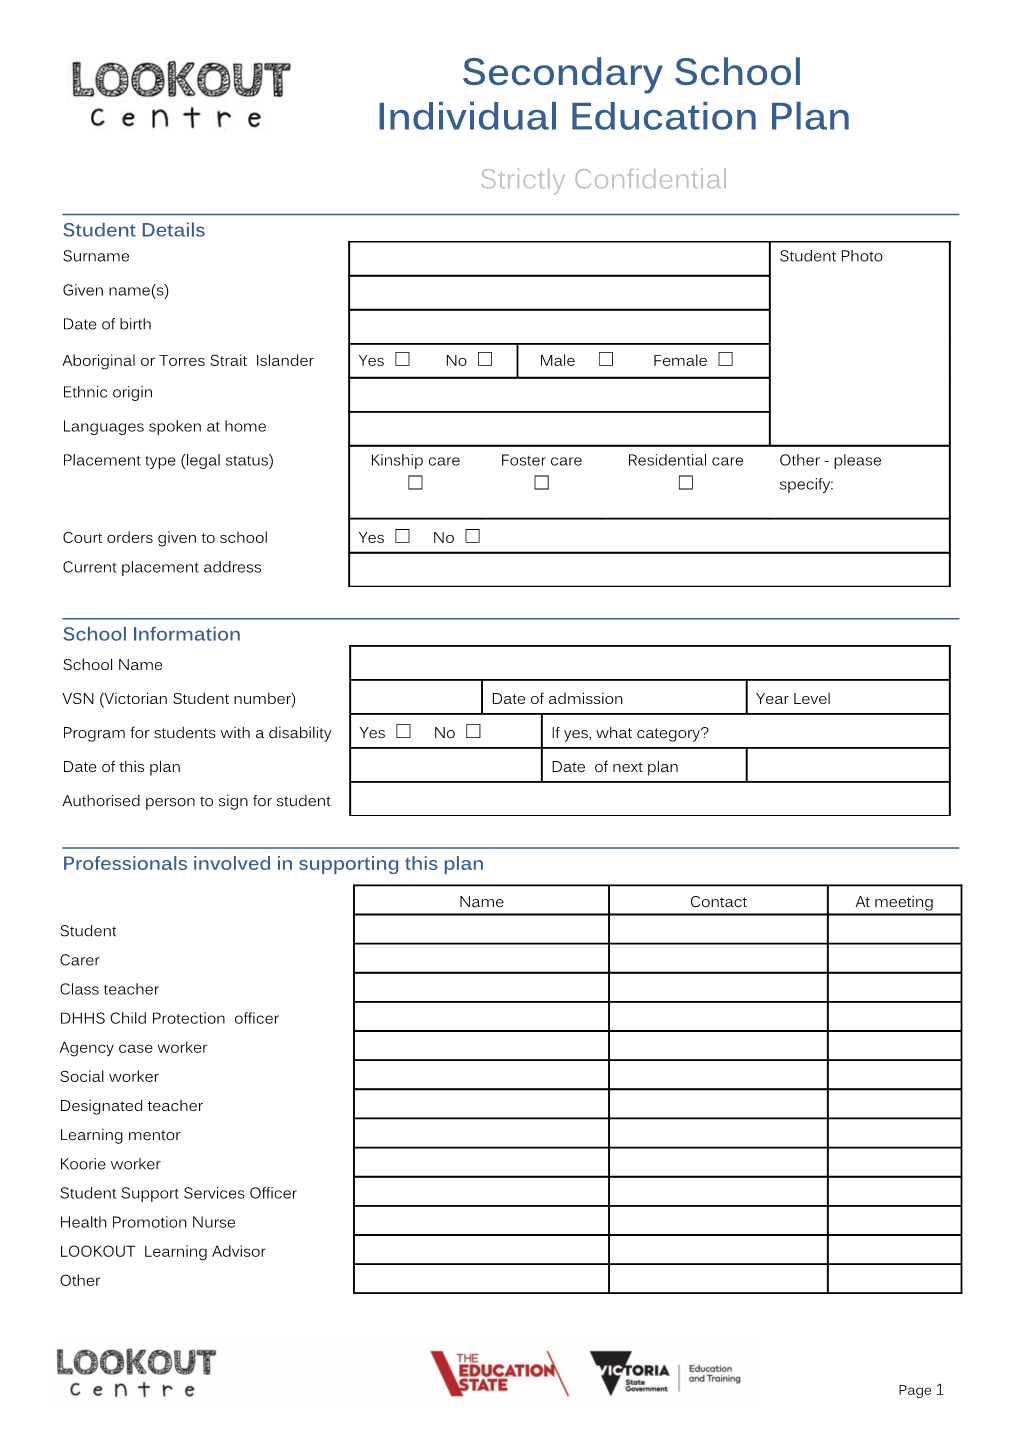 IEP Template for Secondary Schools